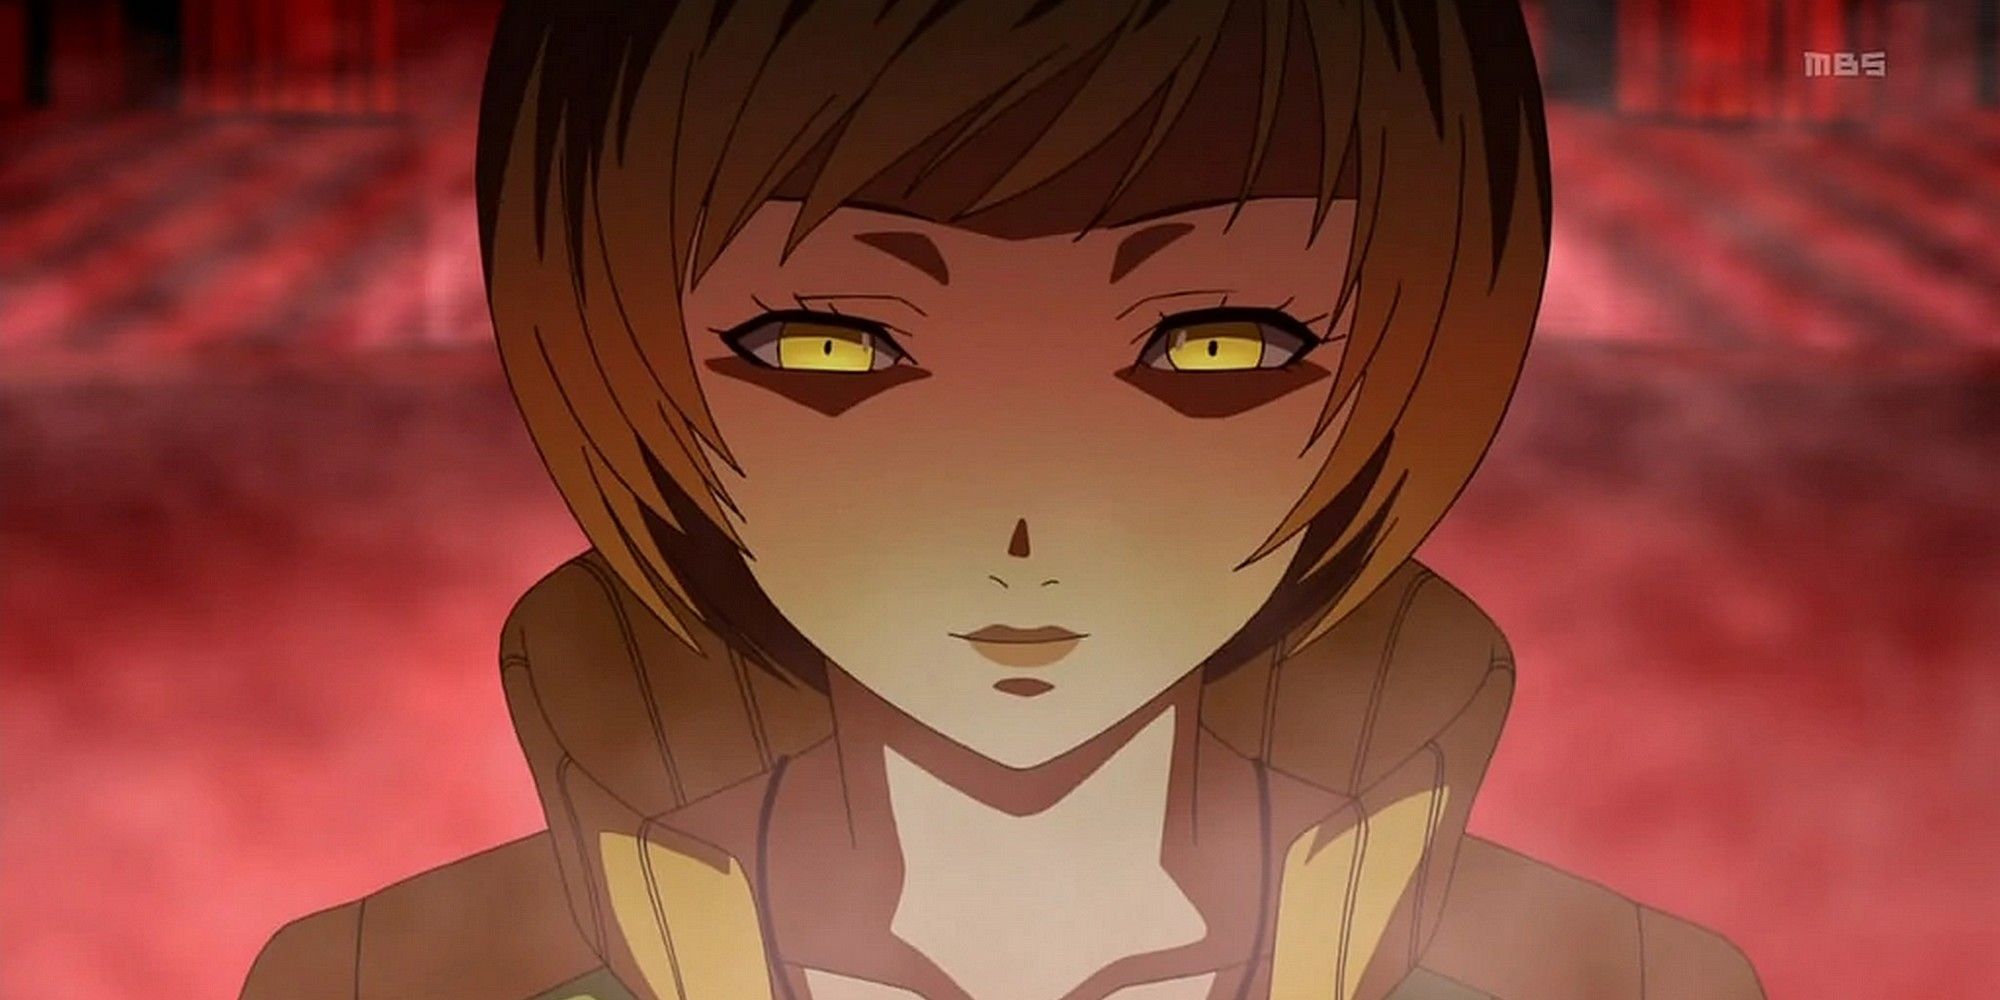 shadow chie still from the persona 4 golden anime